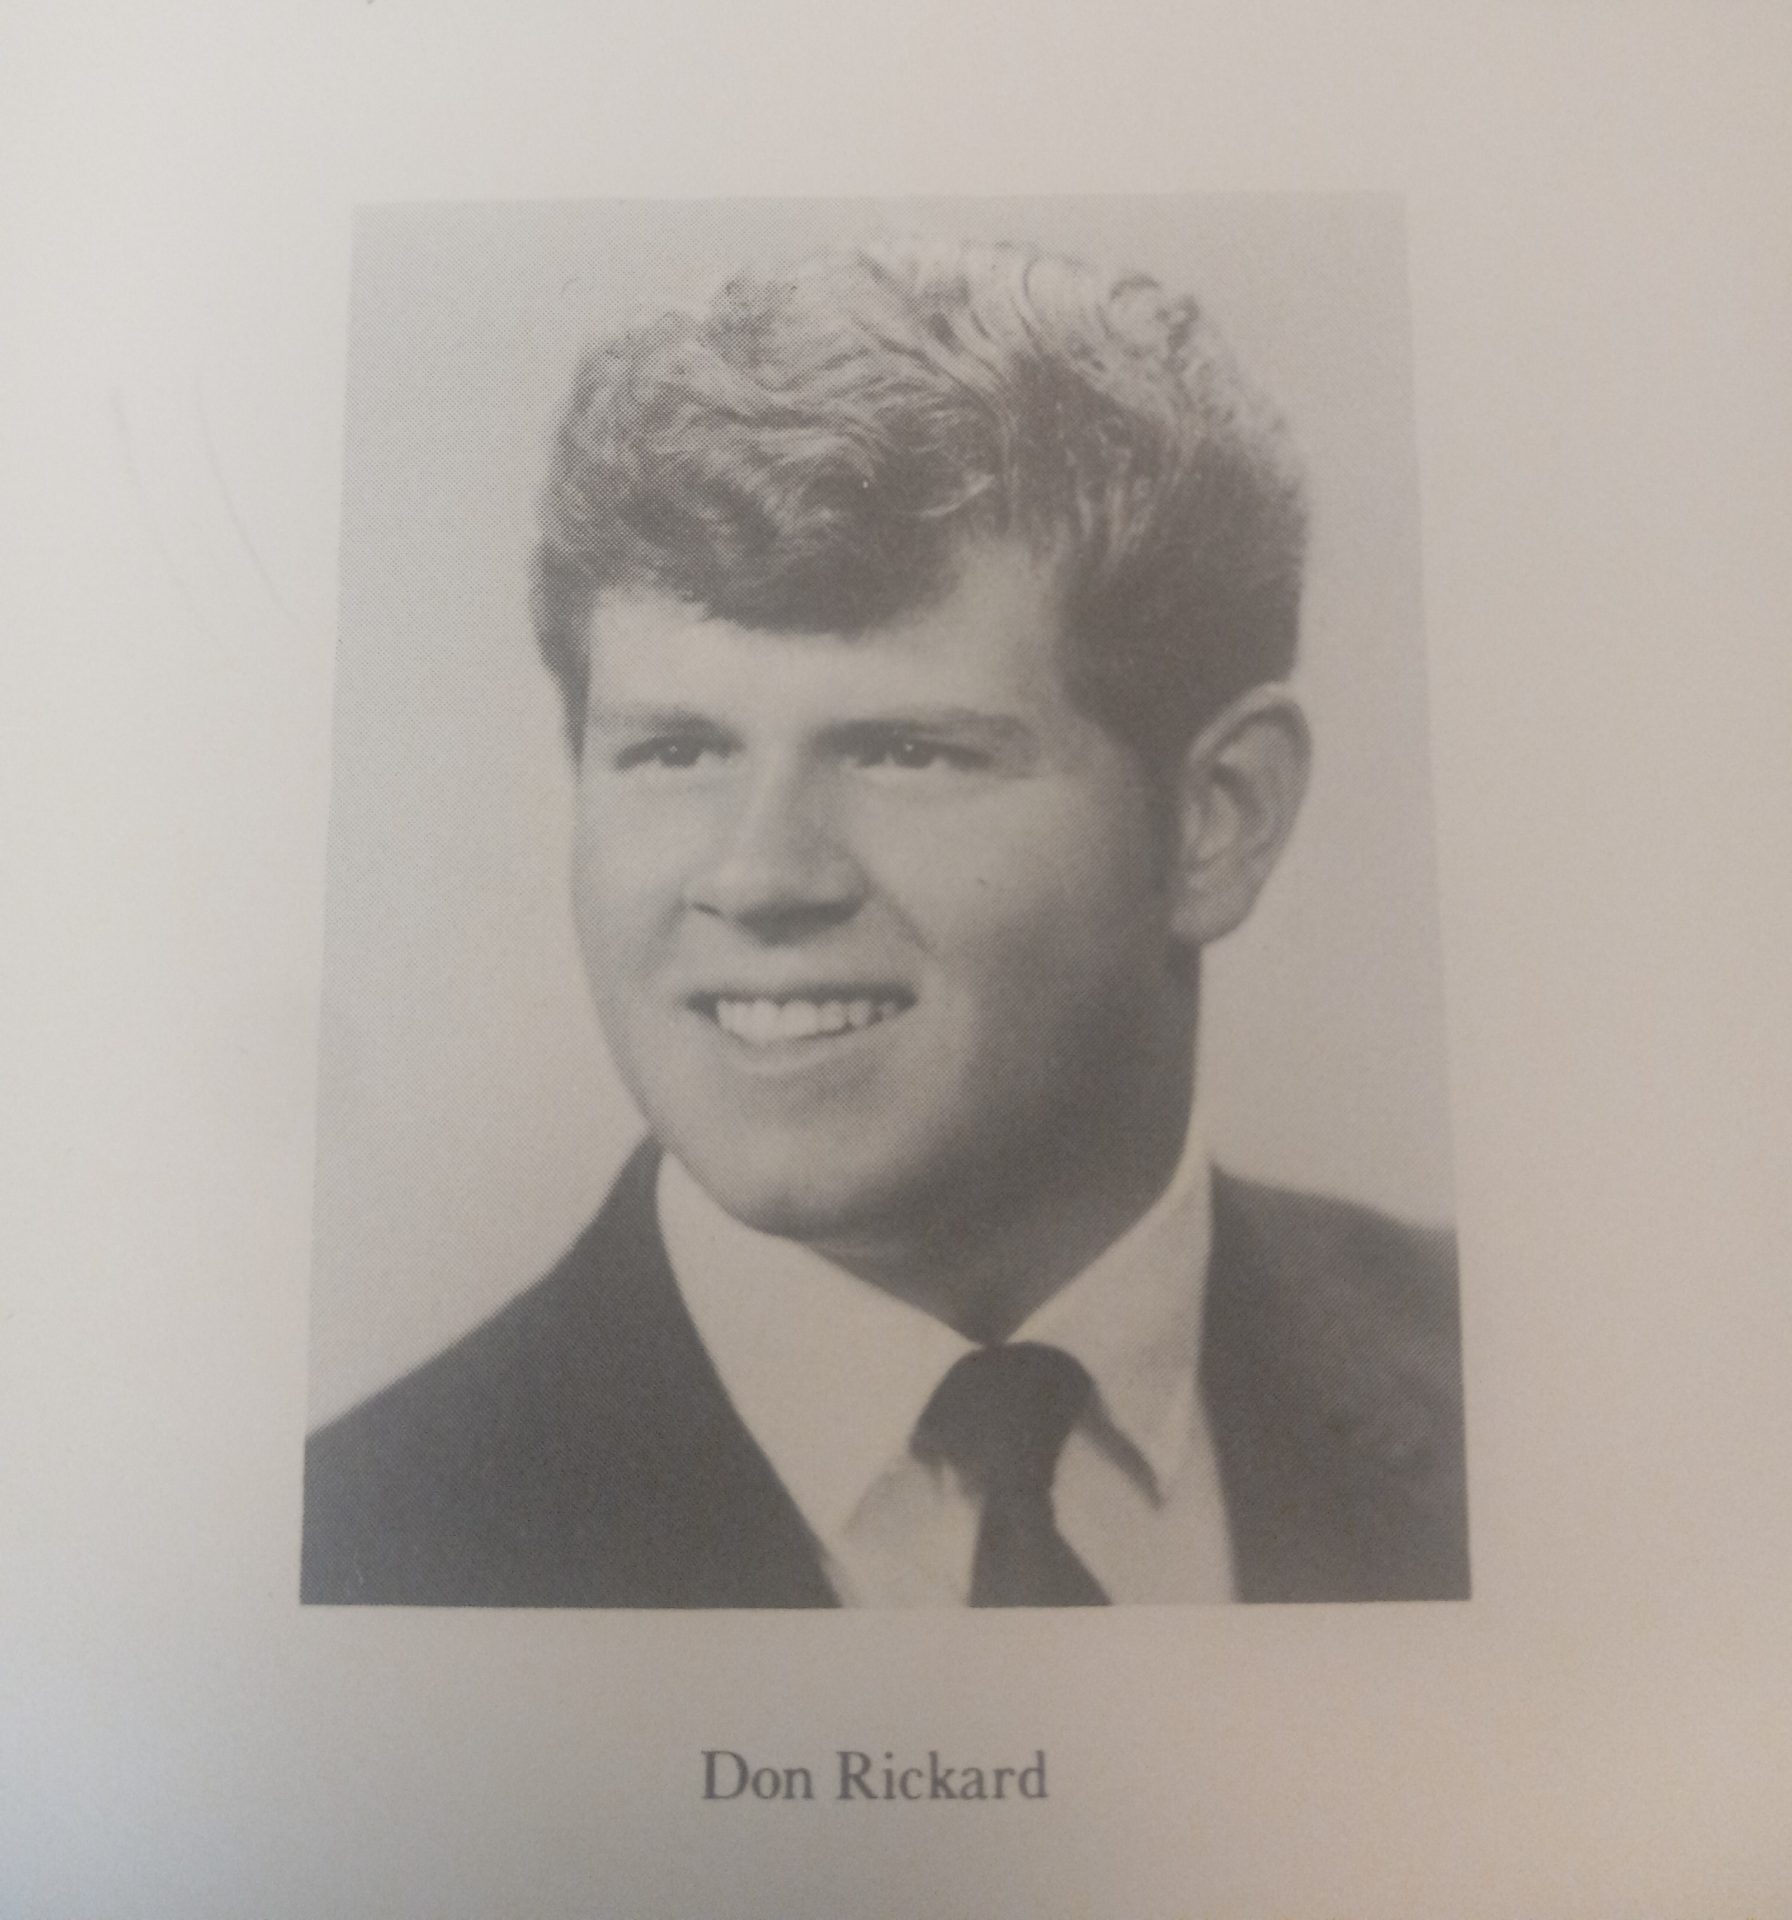 Don's graduation picture Lowrey High School 1969.  His Gradmother said he looked like John F Kennedy.  I think so too.